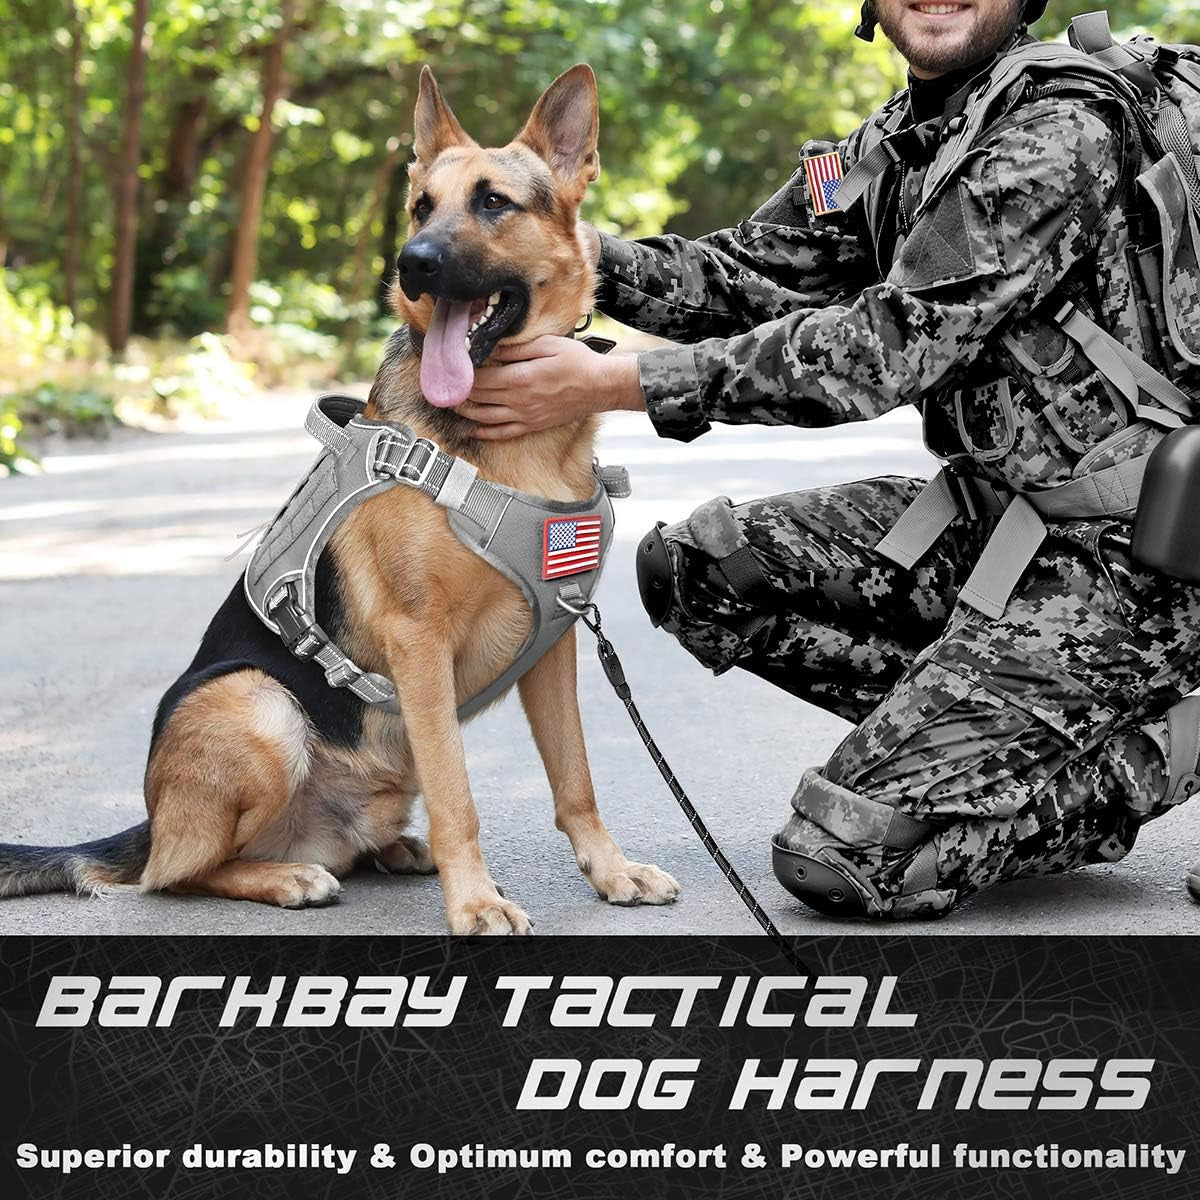 DNALLRINO Tactical Dog Harness for Large Medium Dogs, Heavy Duty